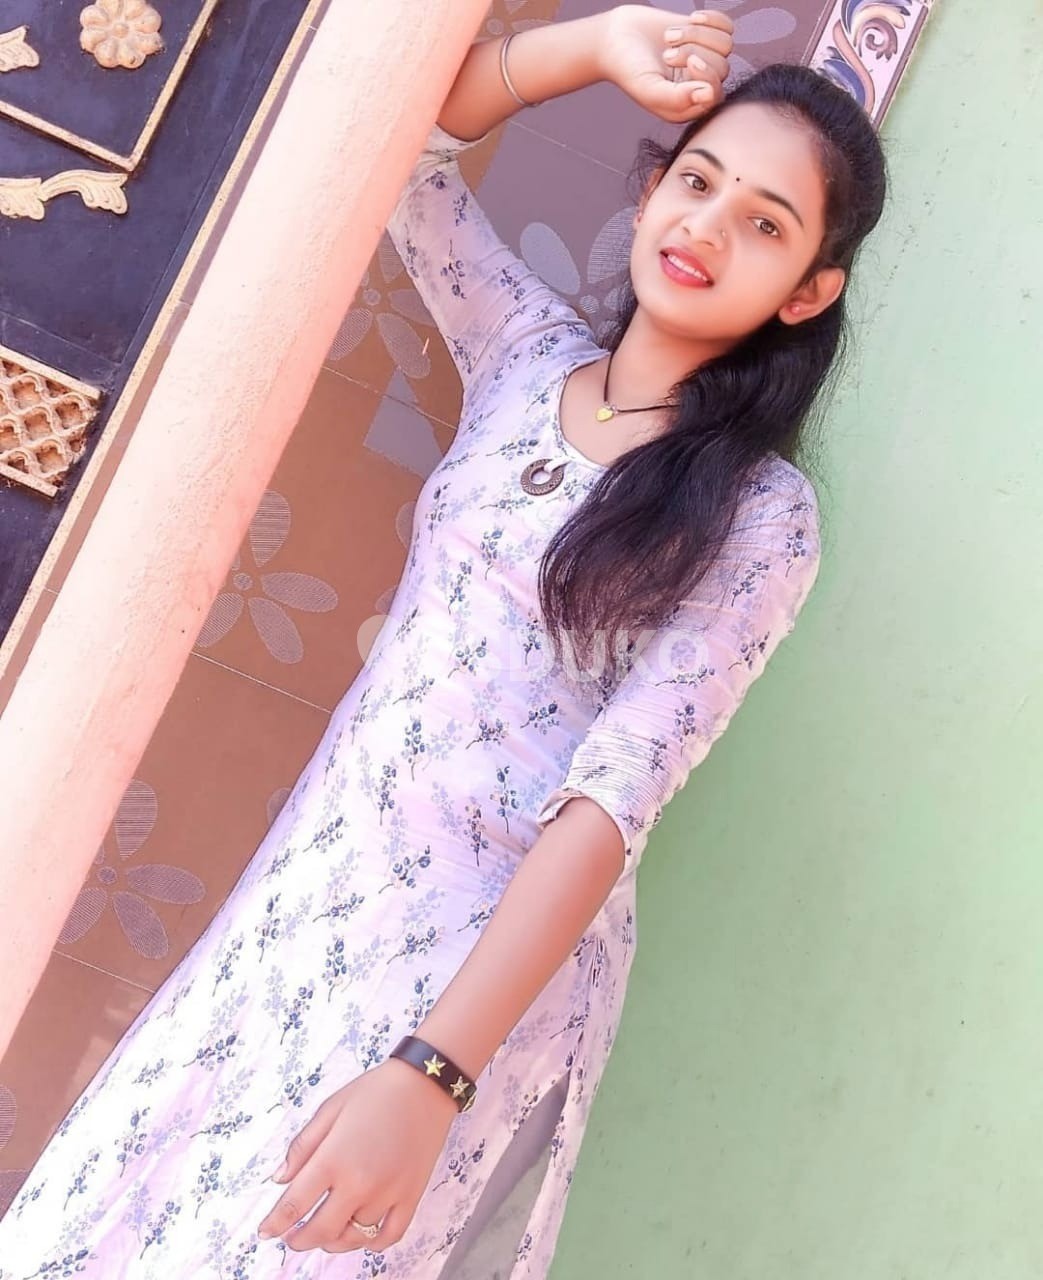 DUM DUM MY SELF DIVYA UNLIMITED SEX CUTE BEST SERVICE AND SAFE AND SECURE AND 24 HR AVAILABLE nvjjjgg